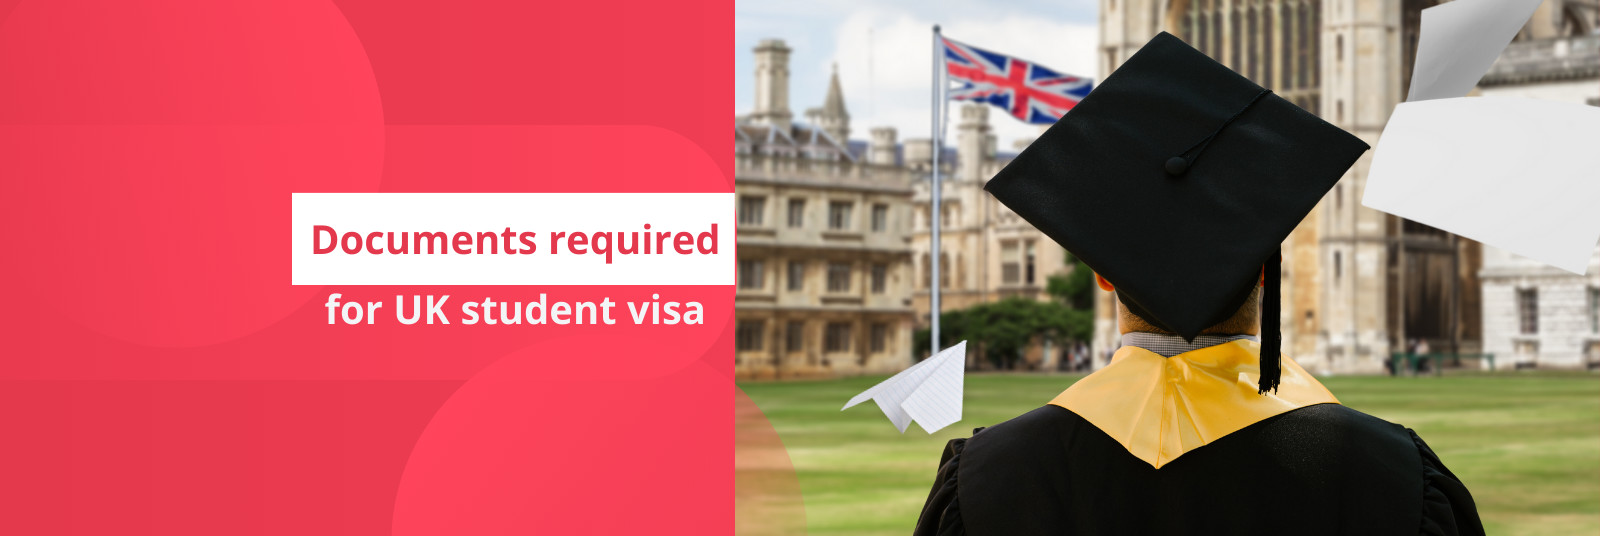 What documents are required for a UK student visa?